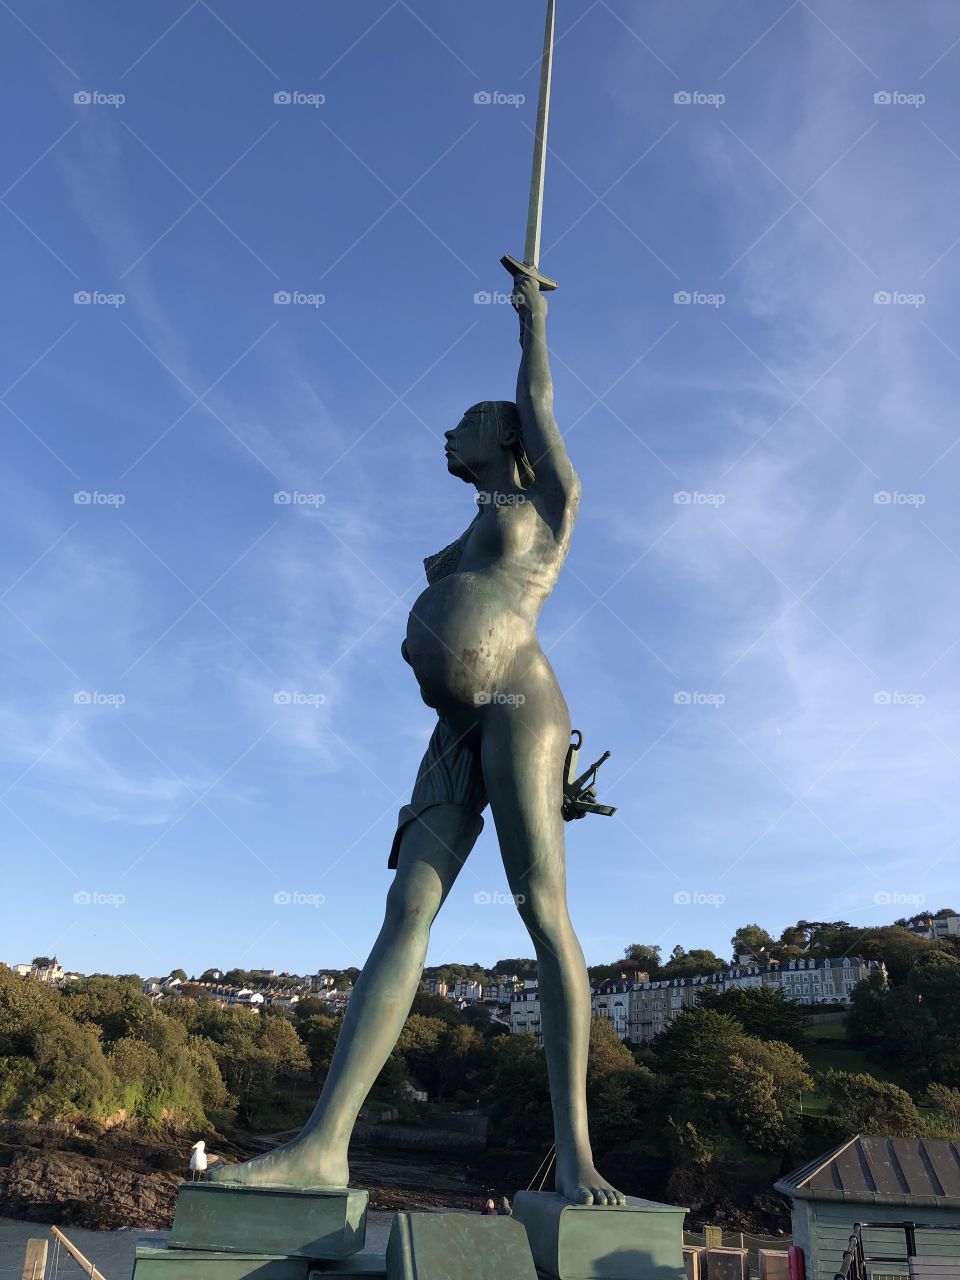 This is a huge sculpture created by the famous artist Damien Hirst, it represents “truth and hope” and can be located in Ilfracombe in Devon, UK.